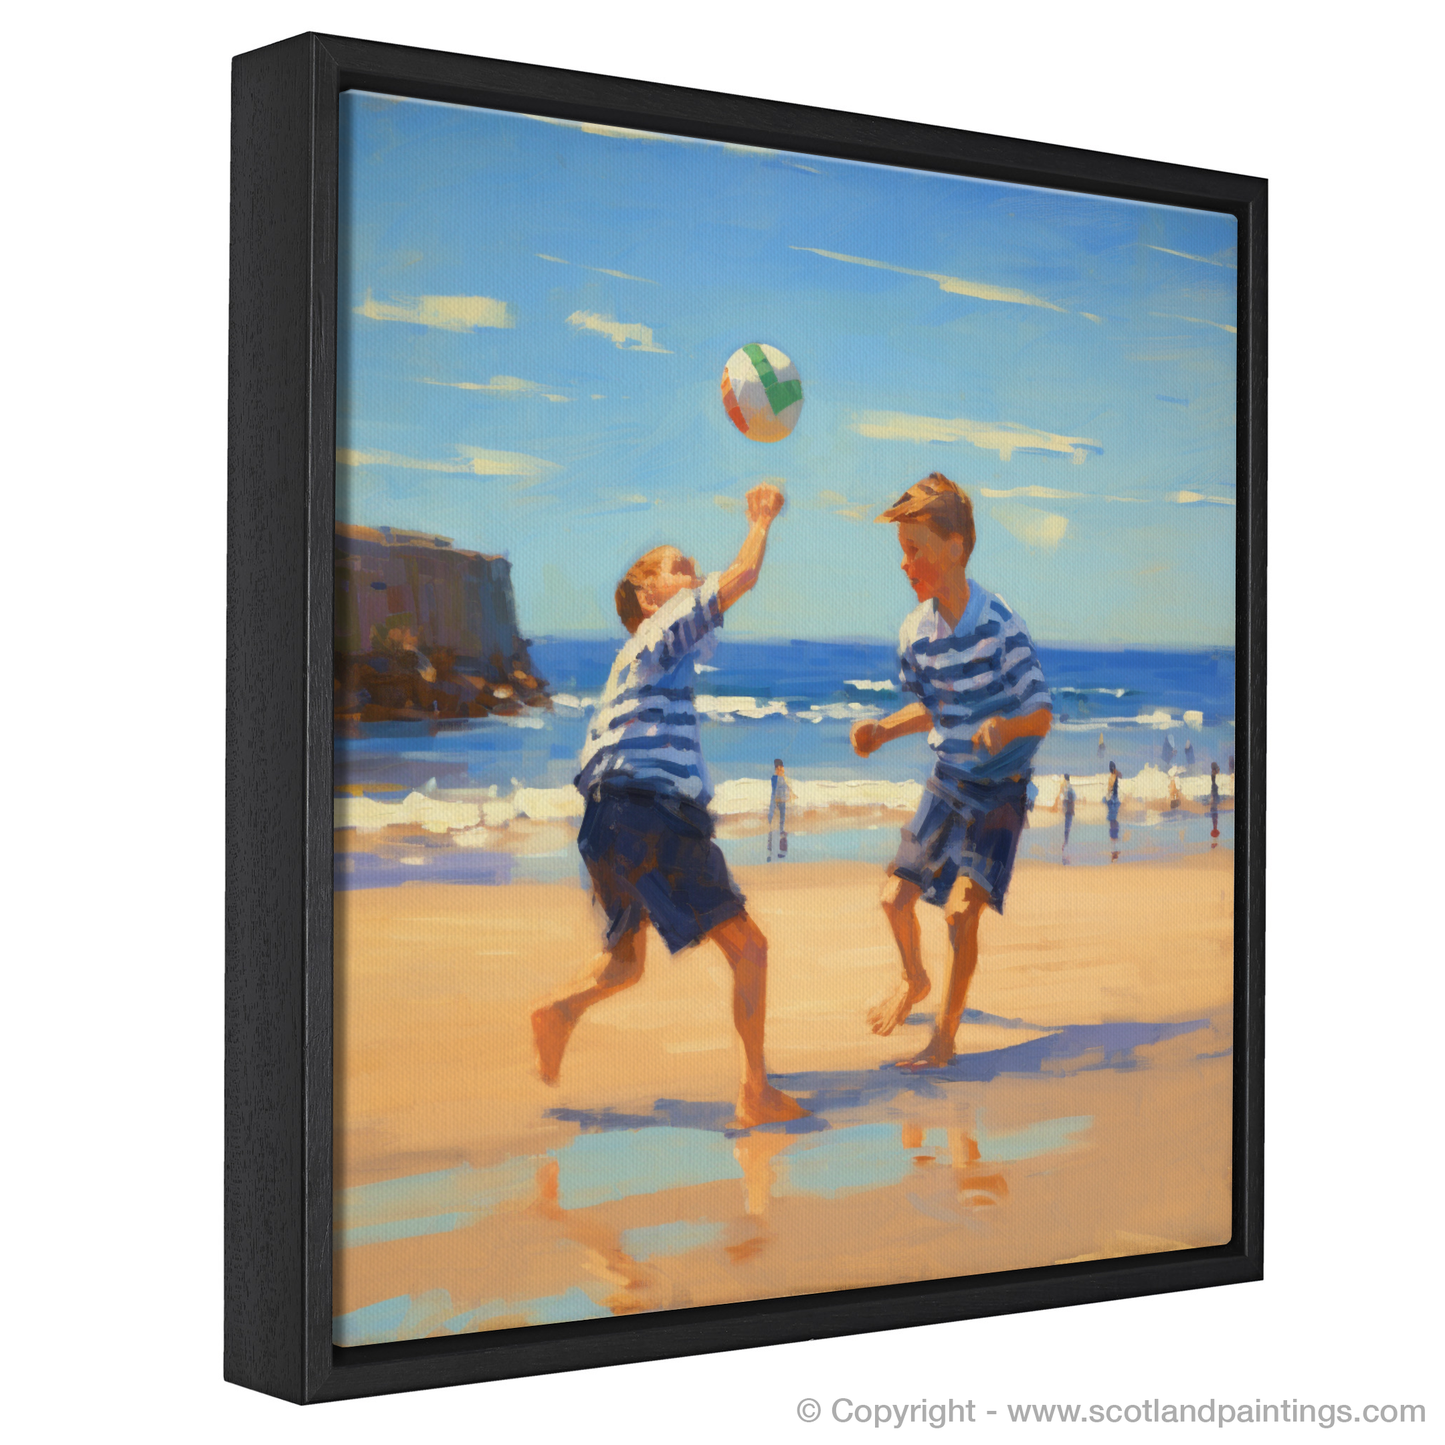 Painting and Art Print of Two boys playing beach volleyball at Burghead Beach entitled "Summer Frolics at Burghead Beach".